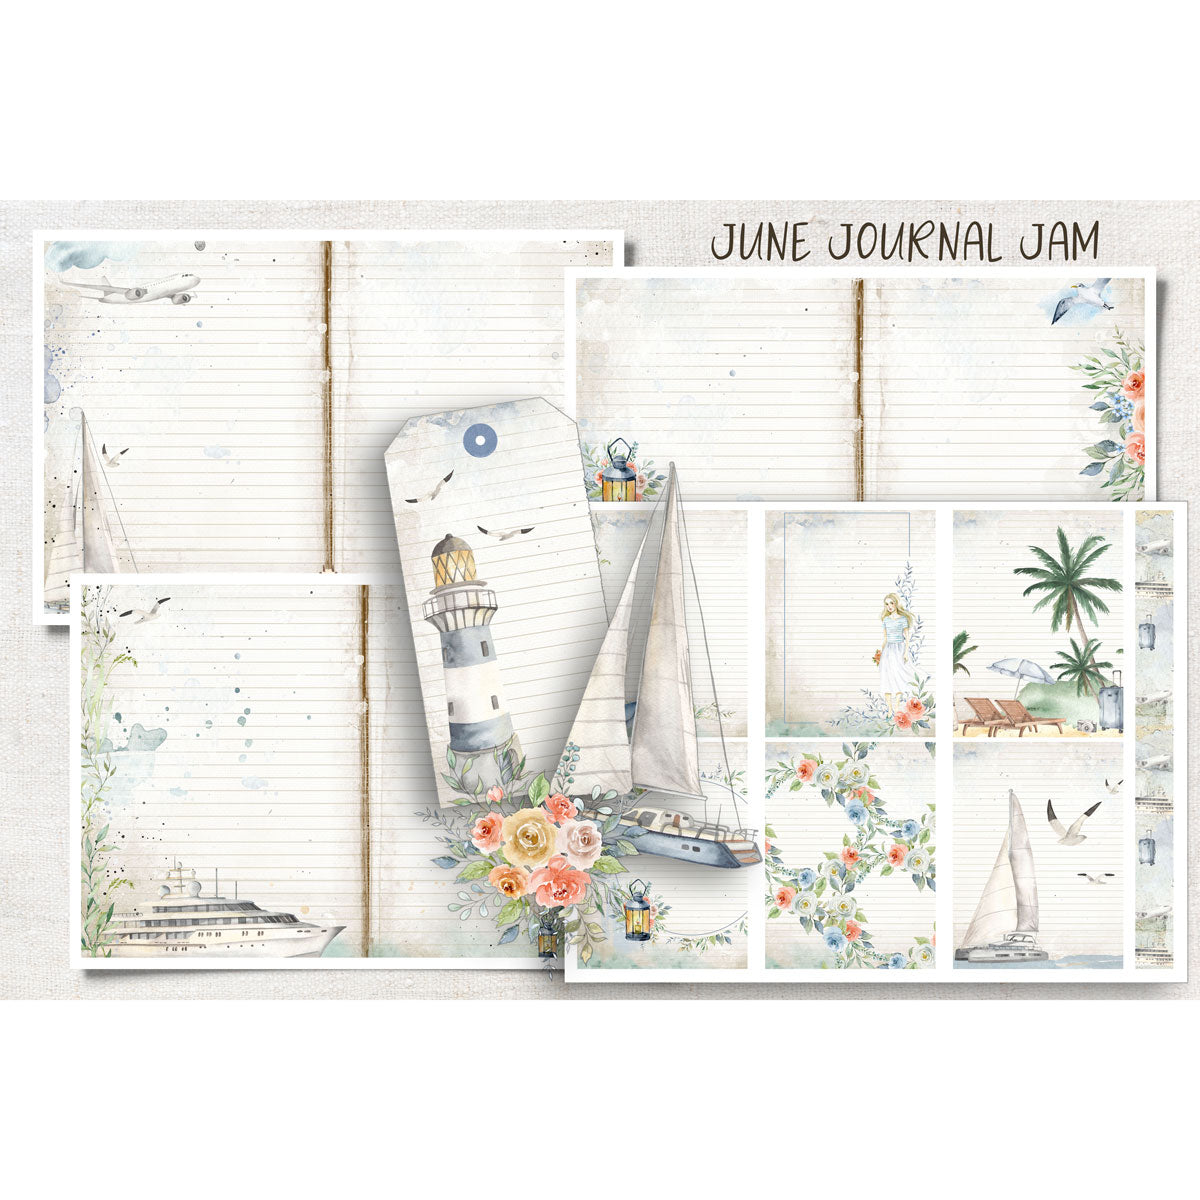 Journal Jam - June - PAPERS ONLY